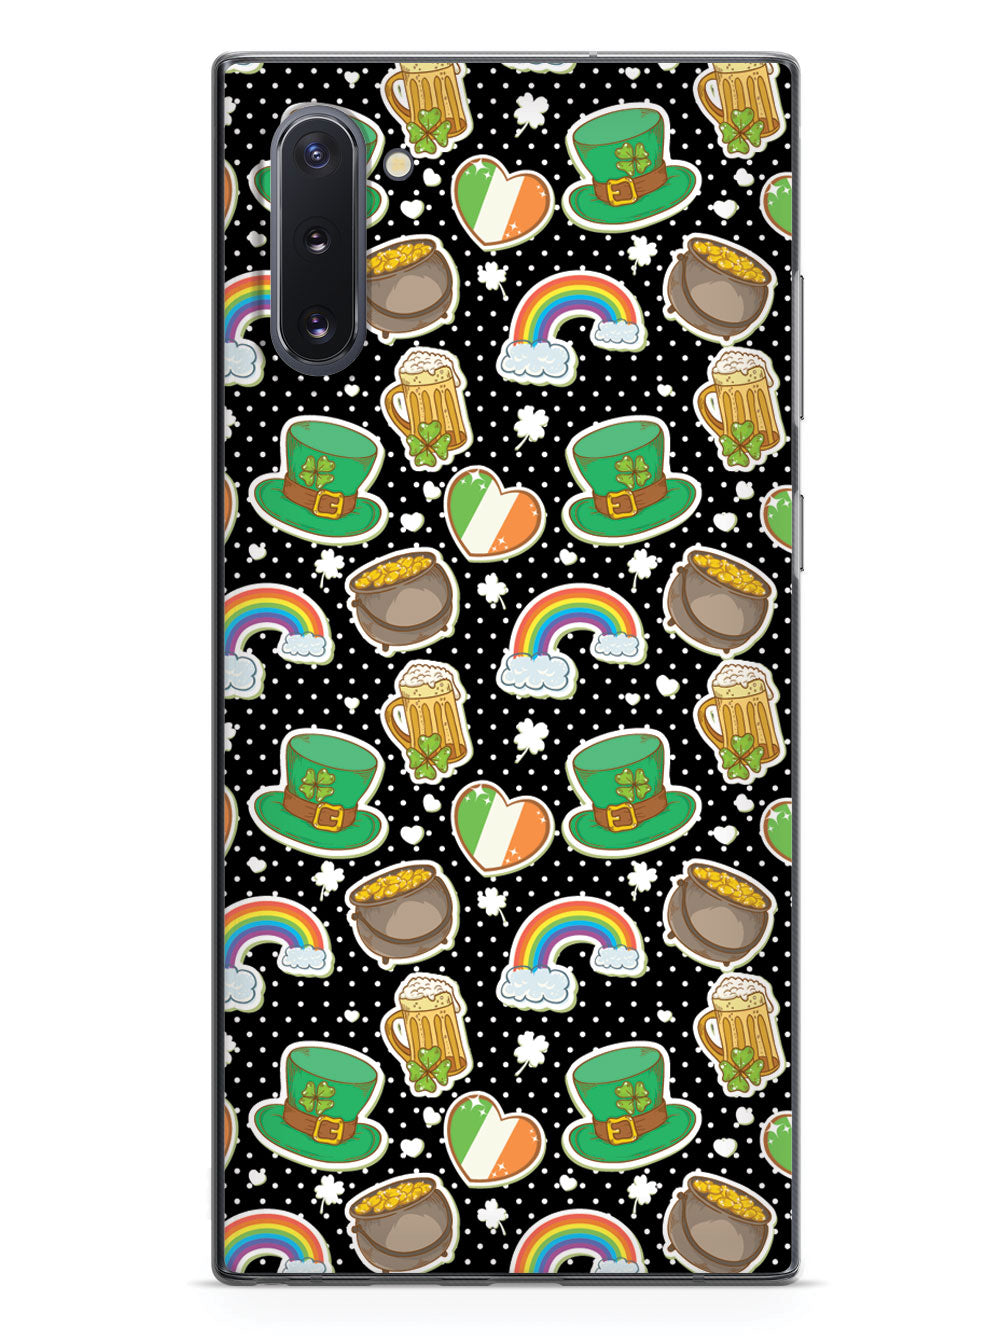 Cute St. Patrick's Day Icons - Black Case